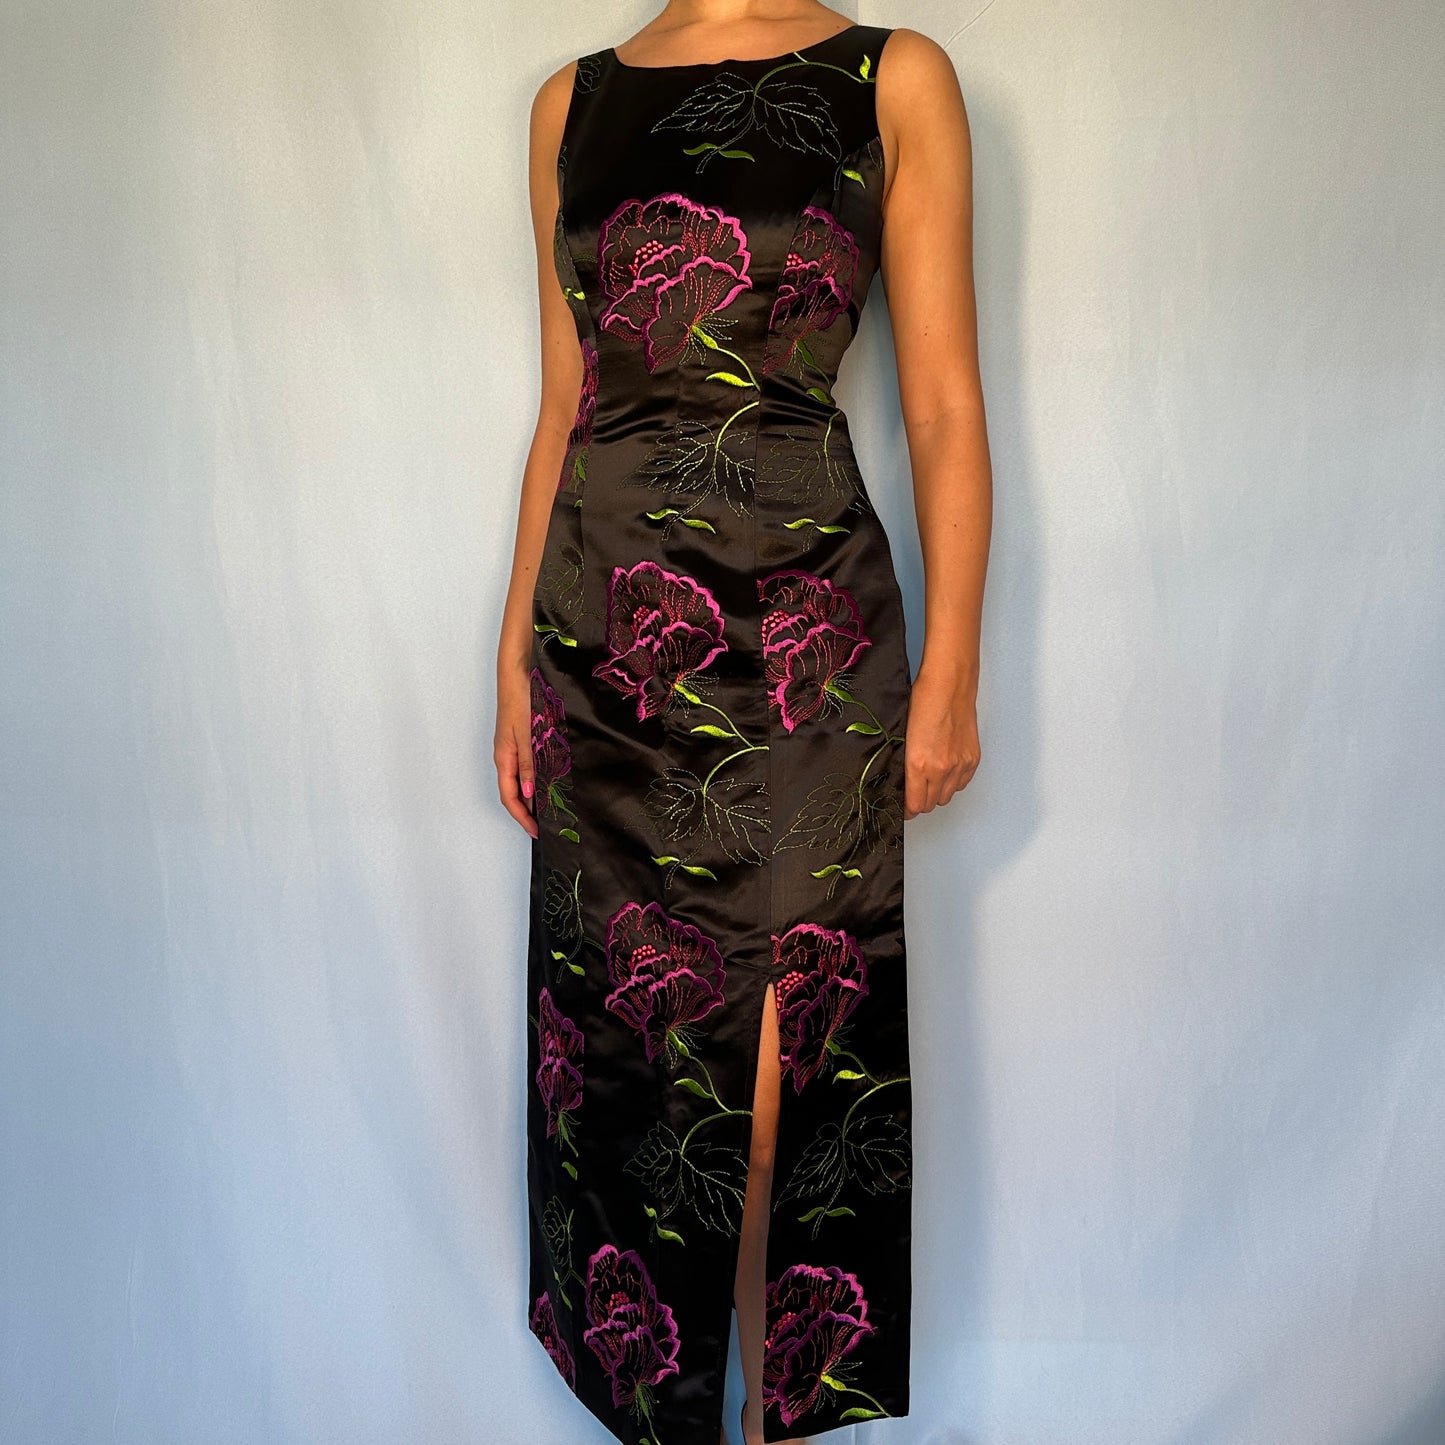 Betsey Johnson Fall 1996 Satin Floral Embroidered Dress